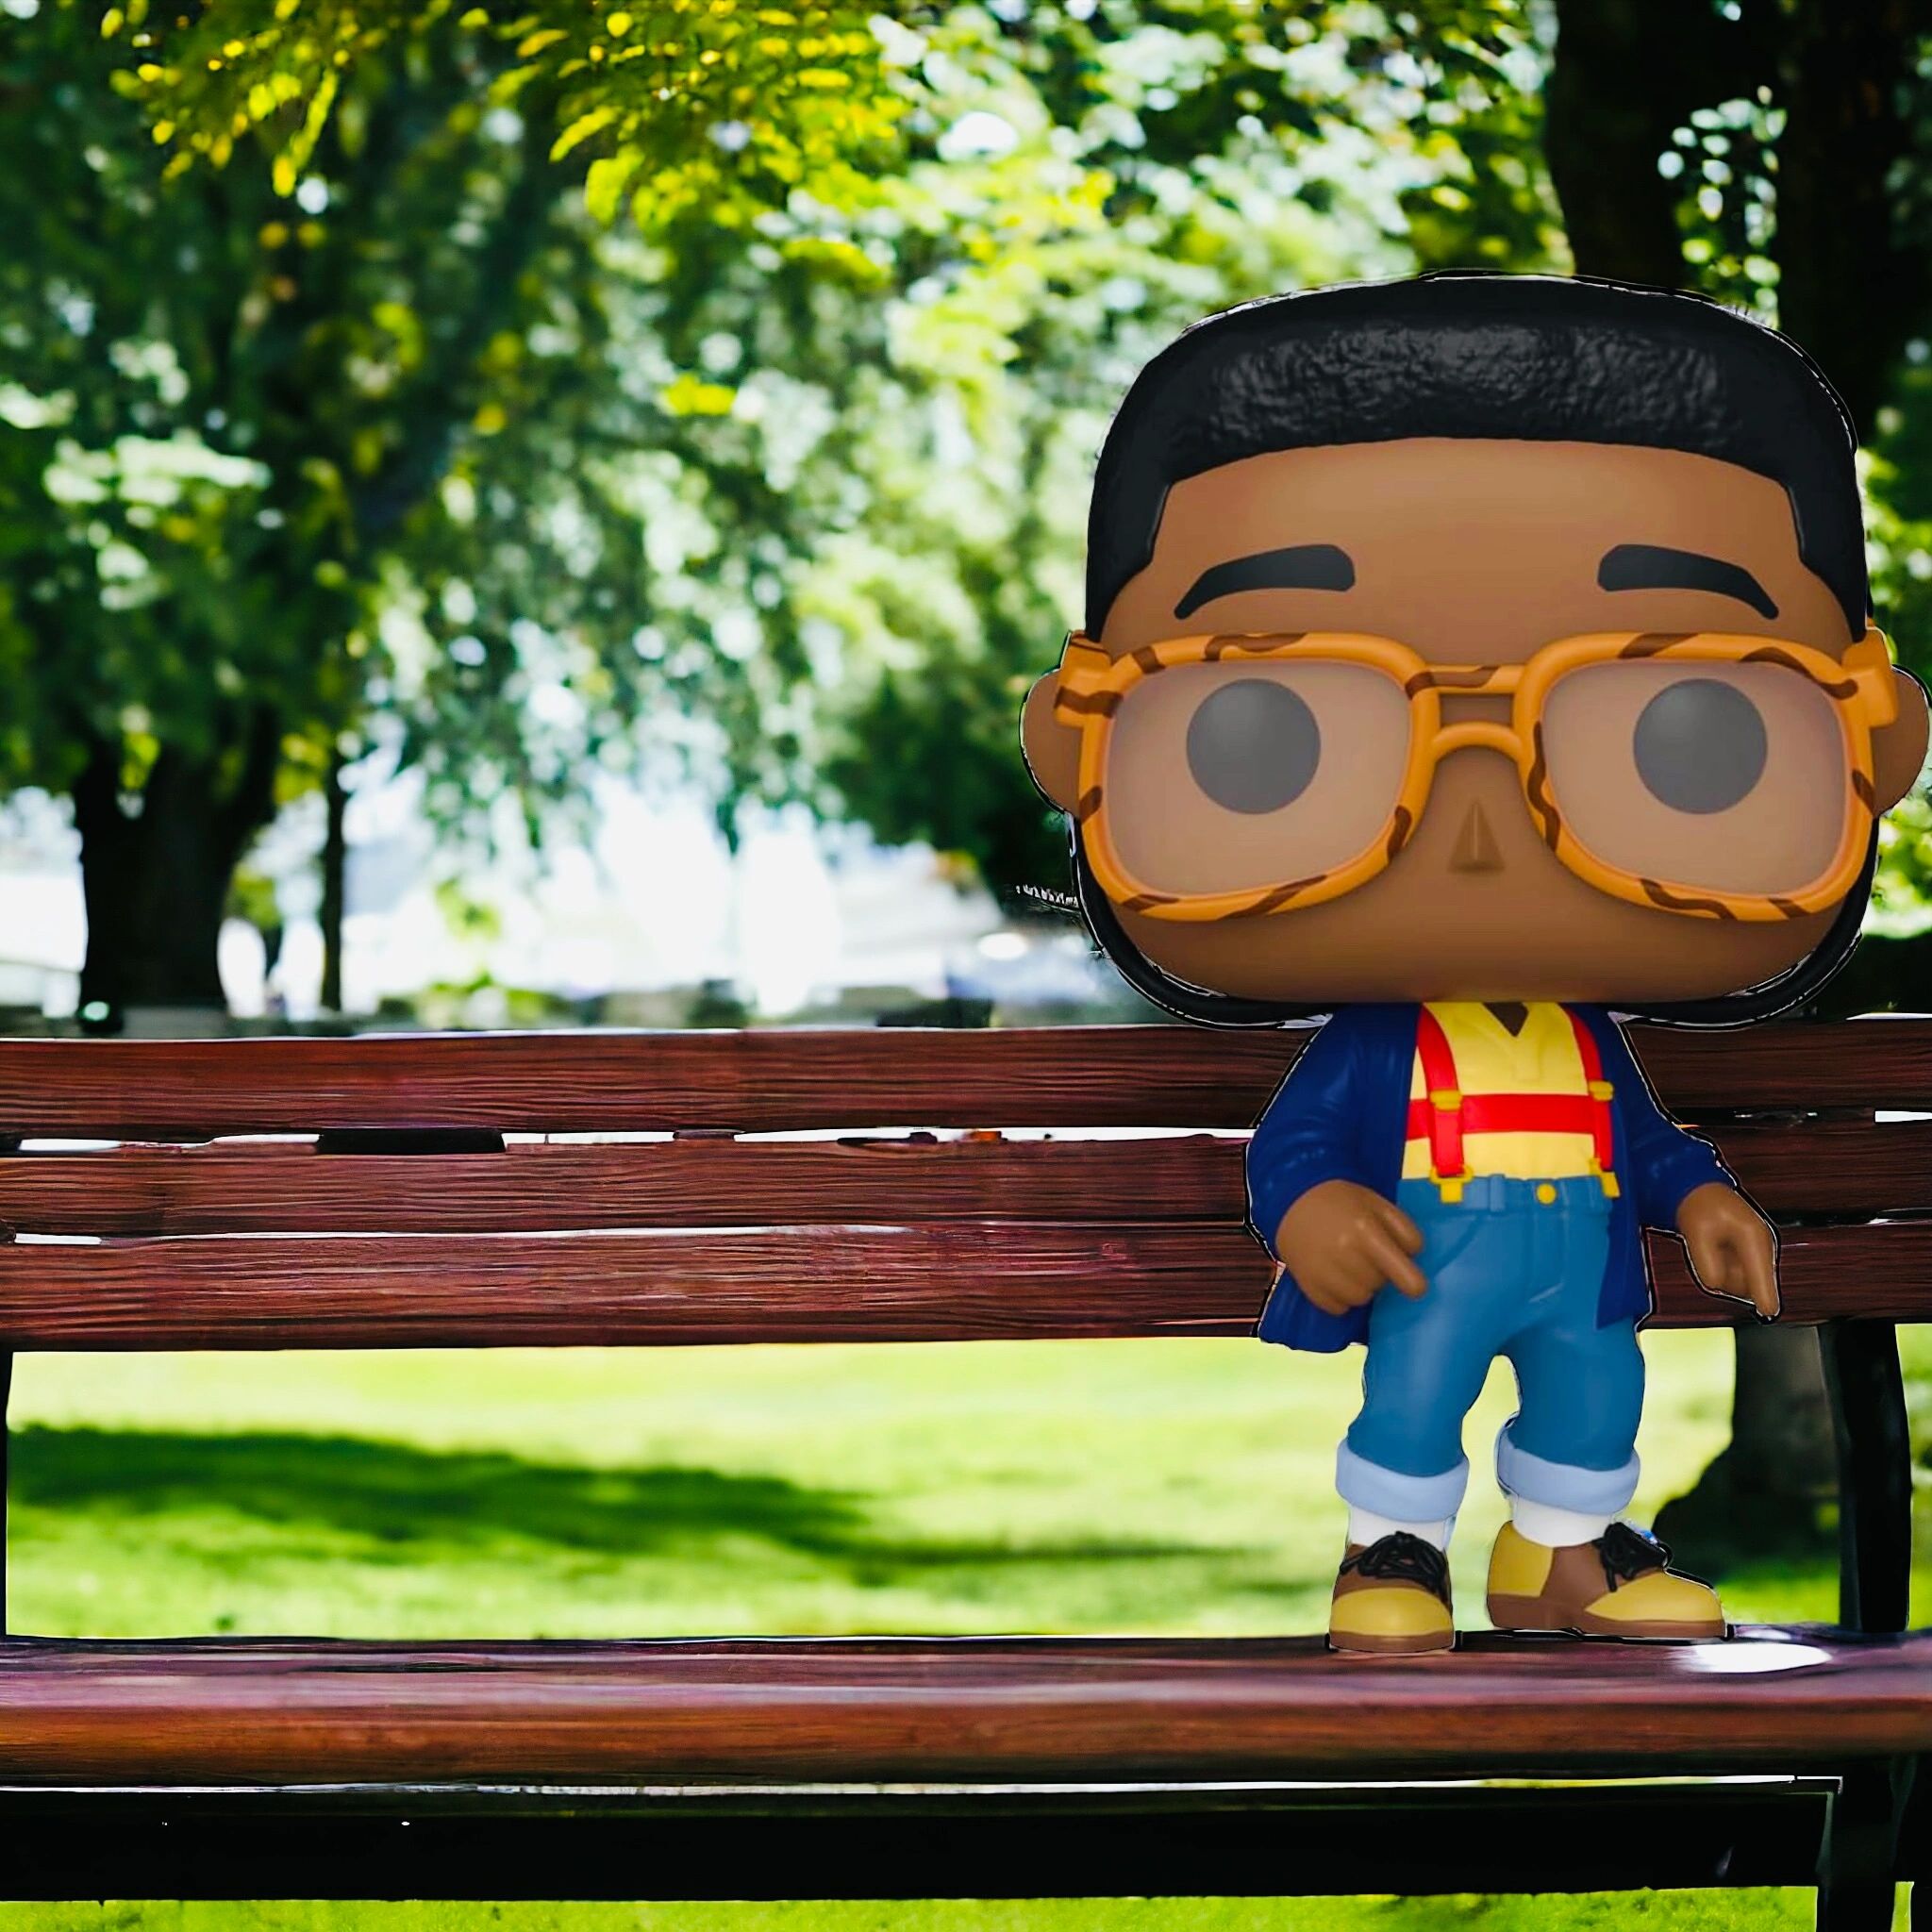 Steve Uriel Funko Pop standing on a bench in the park